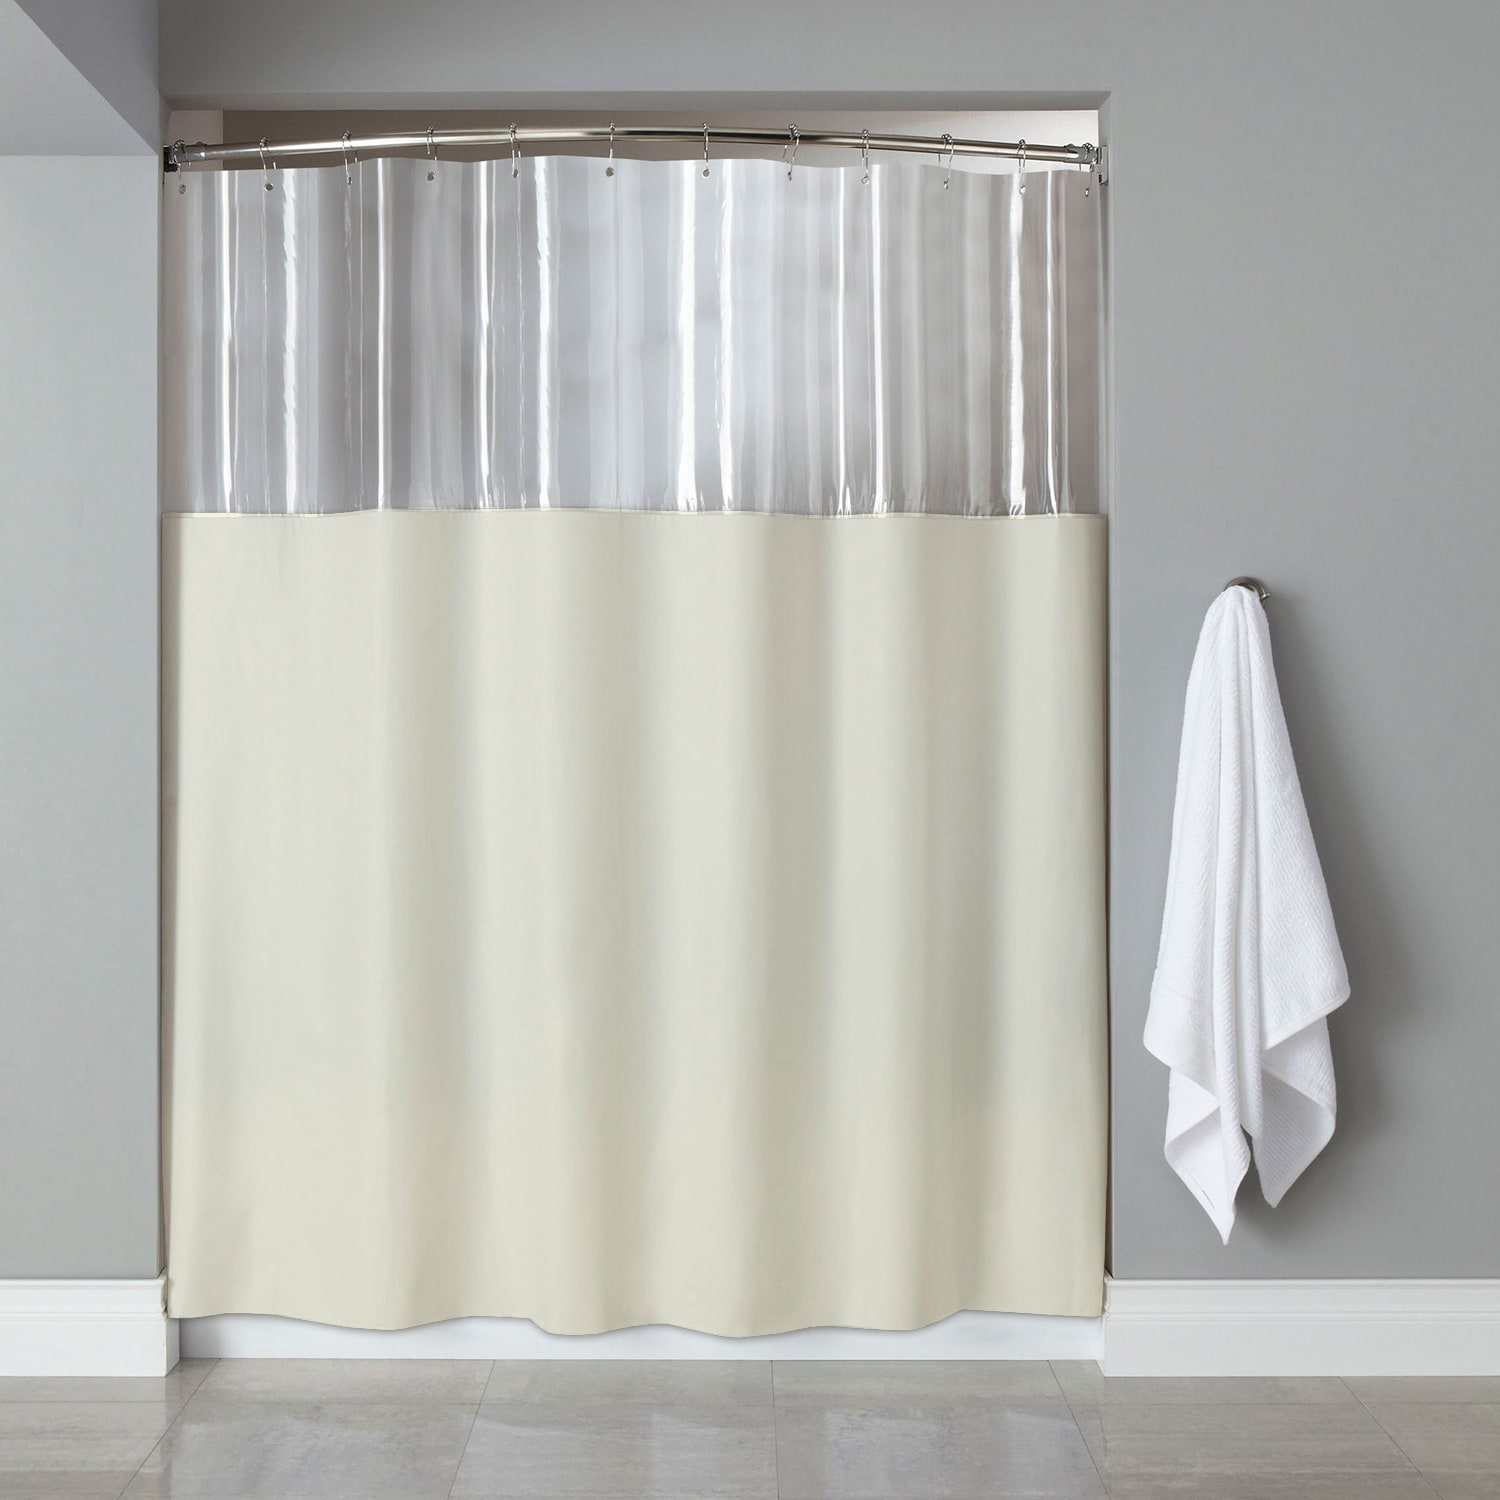 https://ak1.ostkcdn.com/images/products/10745867/Antibacterial-Microbial-Mildew-Resistant-See-Through-Top-Clear-Ivory-Shower-Curtain-72-x72-214e6cda-0aaa-4d06-b406-8e87bc7591cf.jpg